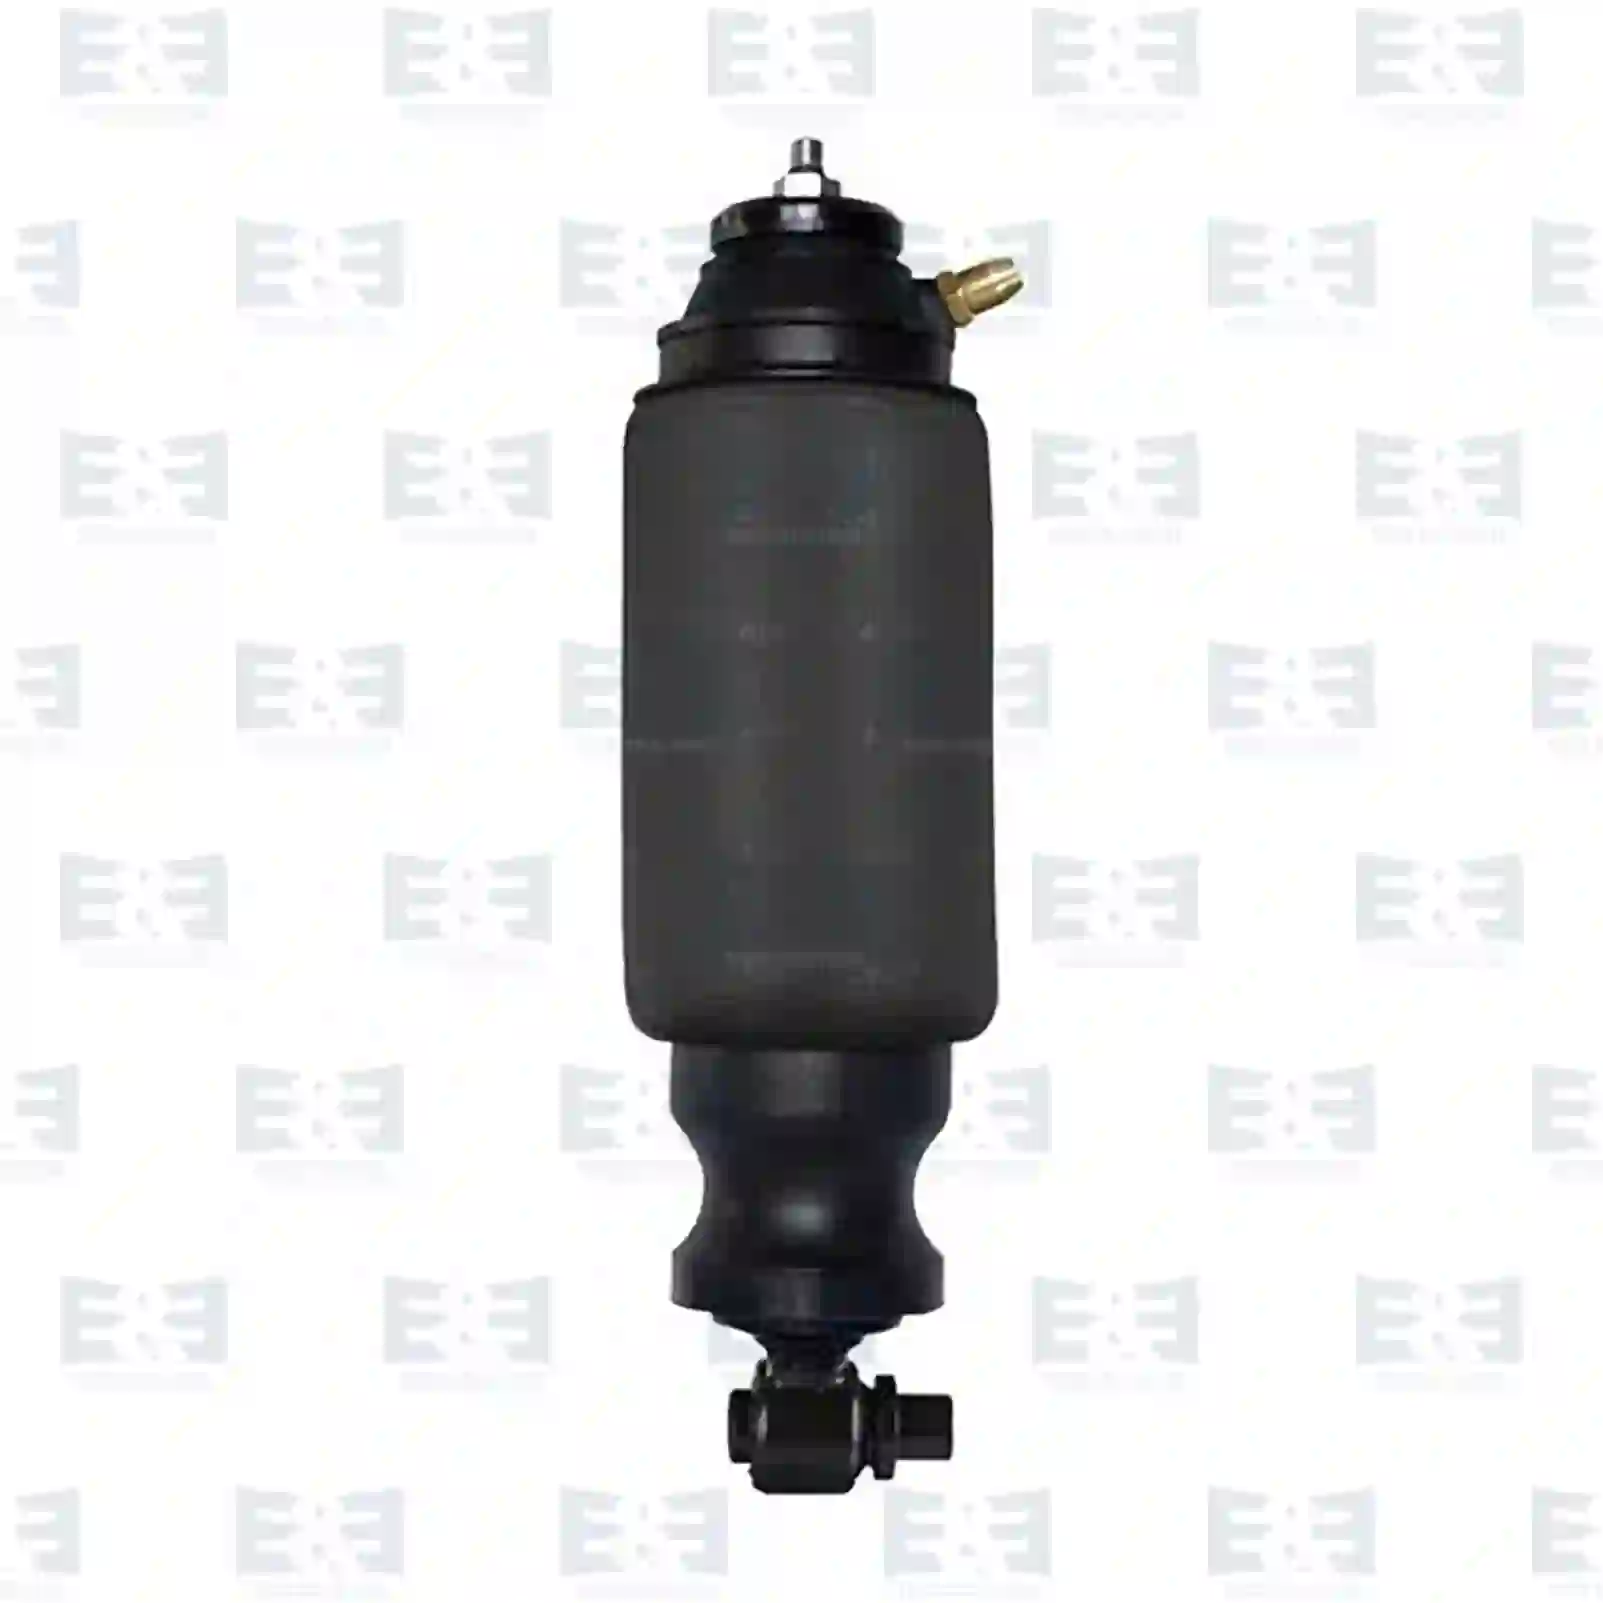 Cabin shock absorber, with air bellow, 2E2275375, 20399204, 20453258, 20889136, 21111942, 3198837 ||  2E2275375 E&E Truck Spare Parts | Truck Spare Parts, Auotomotive Spare Parts Cabin shock absorber, with air bellow, 2E2275375, 20399204, 20453258, 20889136, 21111942, 3198837 ||  2E2275375 E&E Truck Spare Parts | Truck Spare Parts, Auotomotive Spare Parts